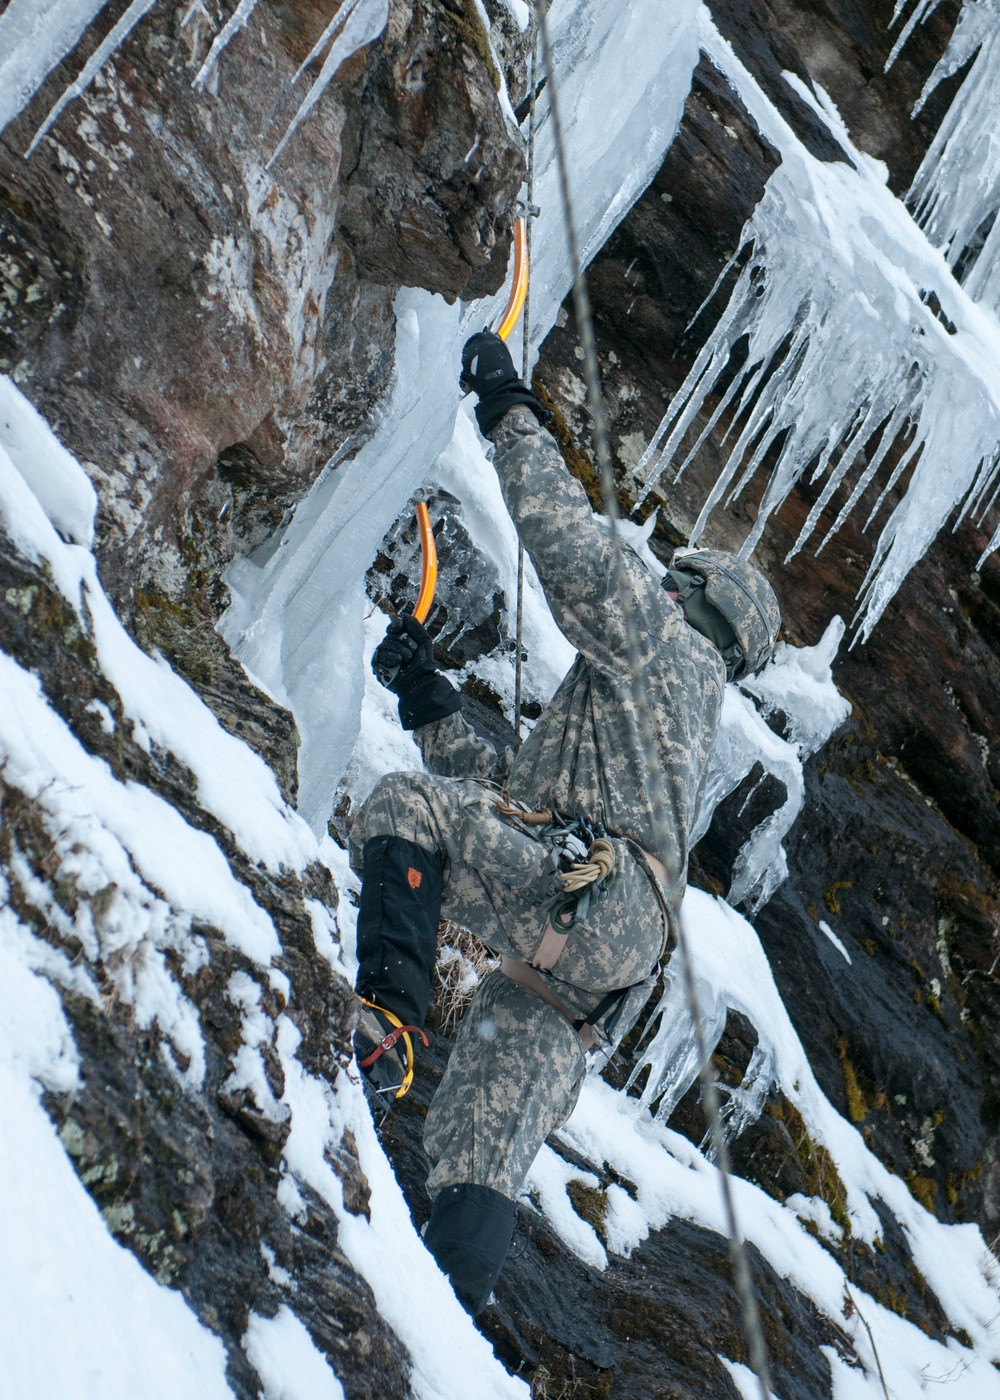 Vermont National Guard Soldier climbs ice wall